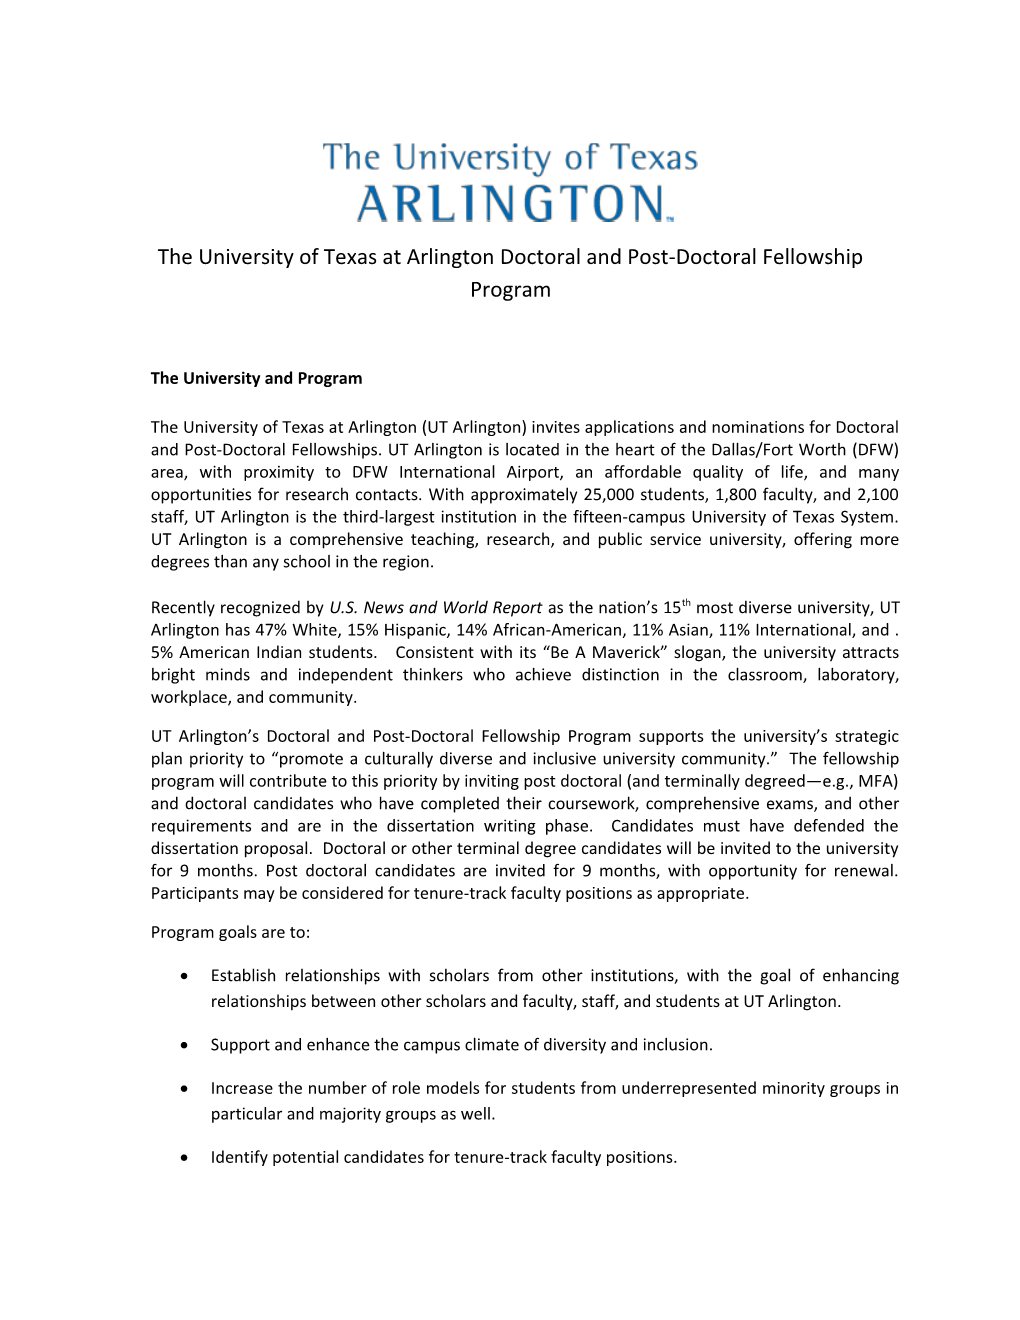 The University of Texas at Arlington Doctoral and Post-Doctoral Fellowship Program